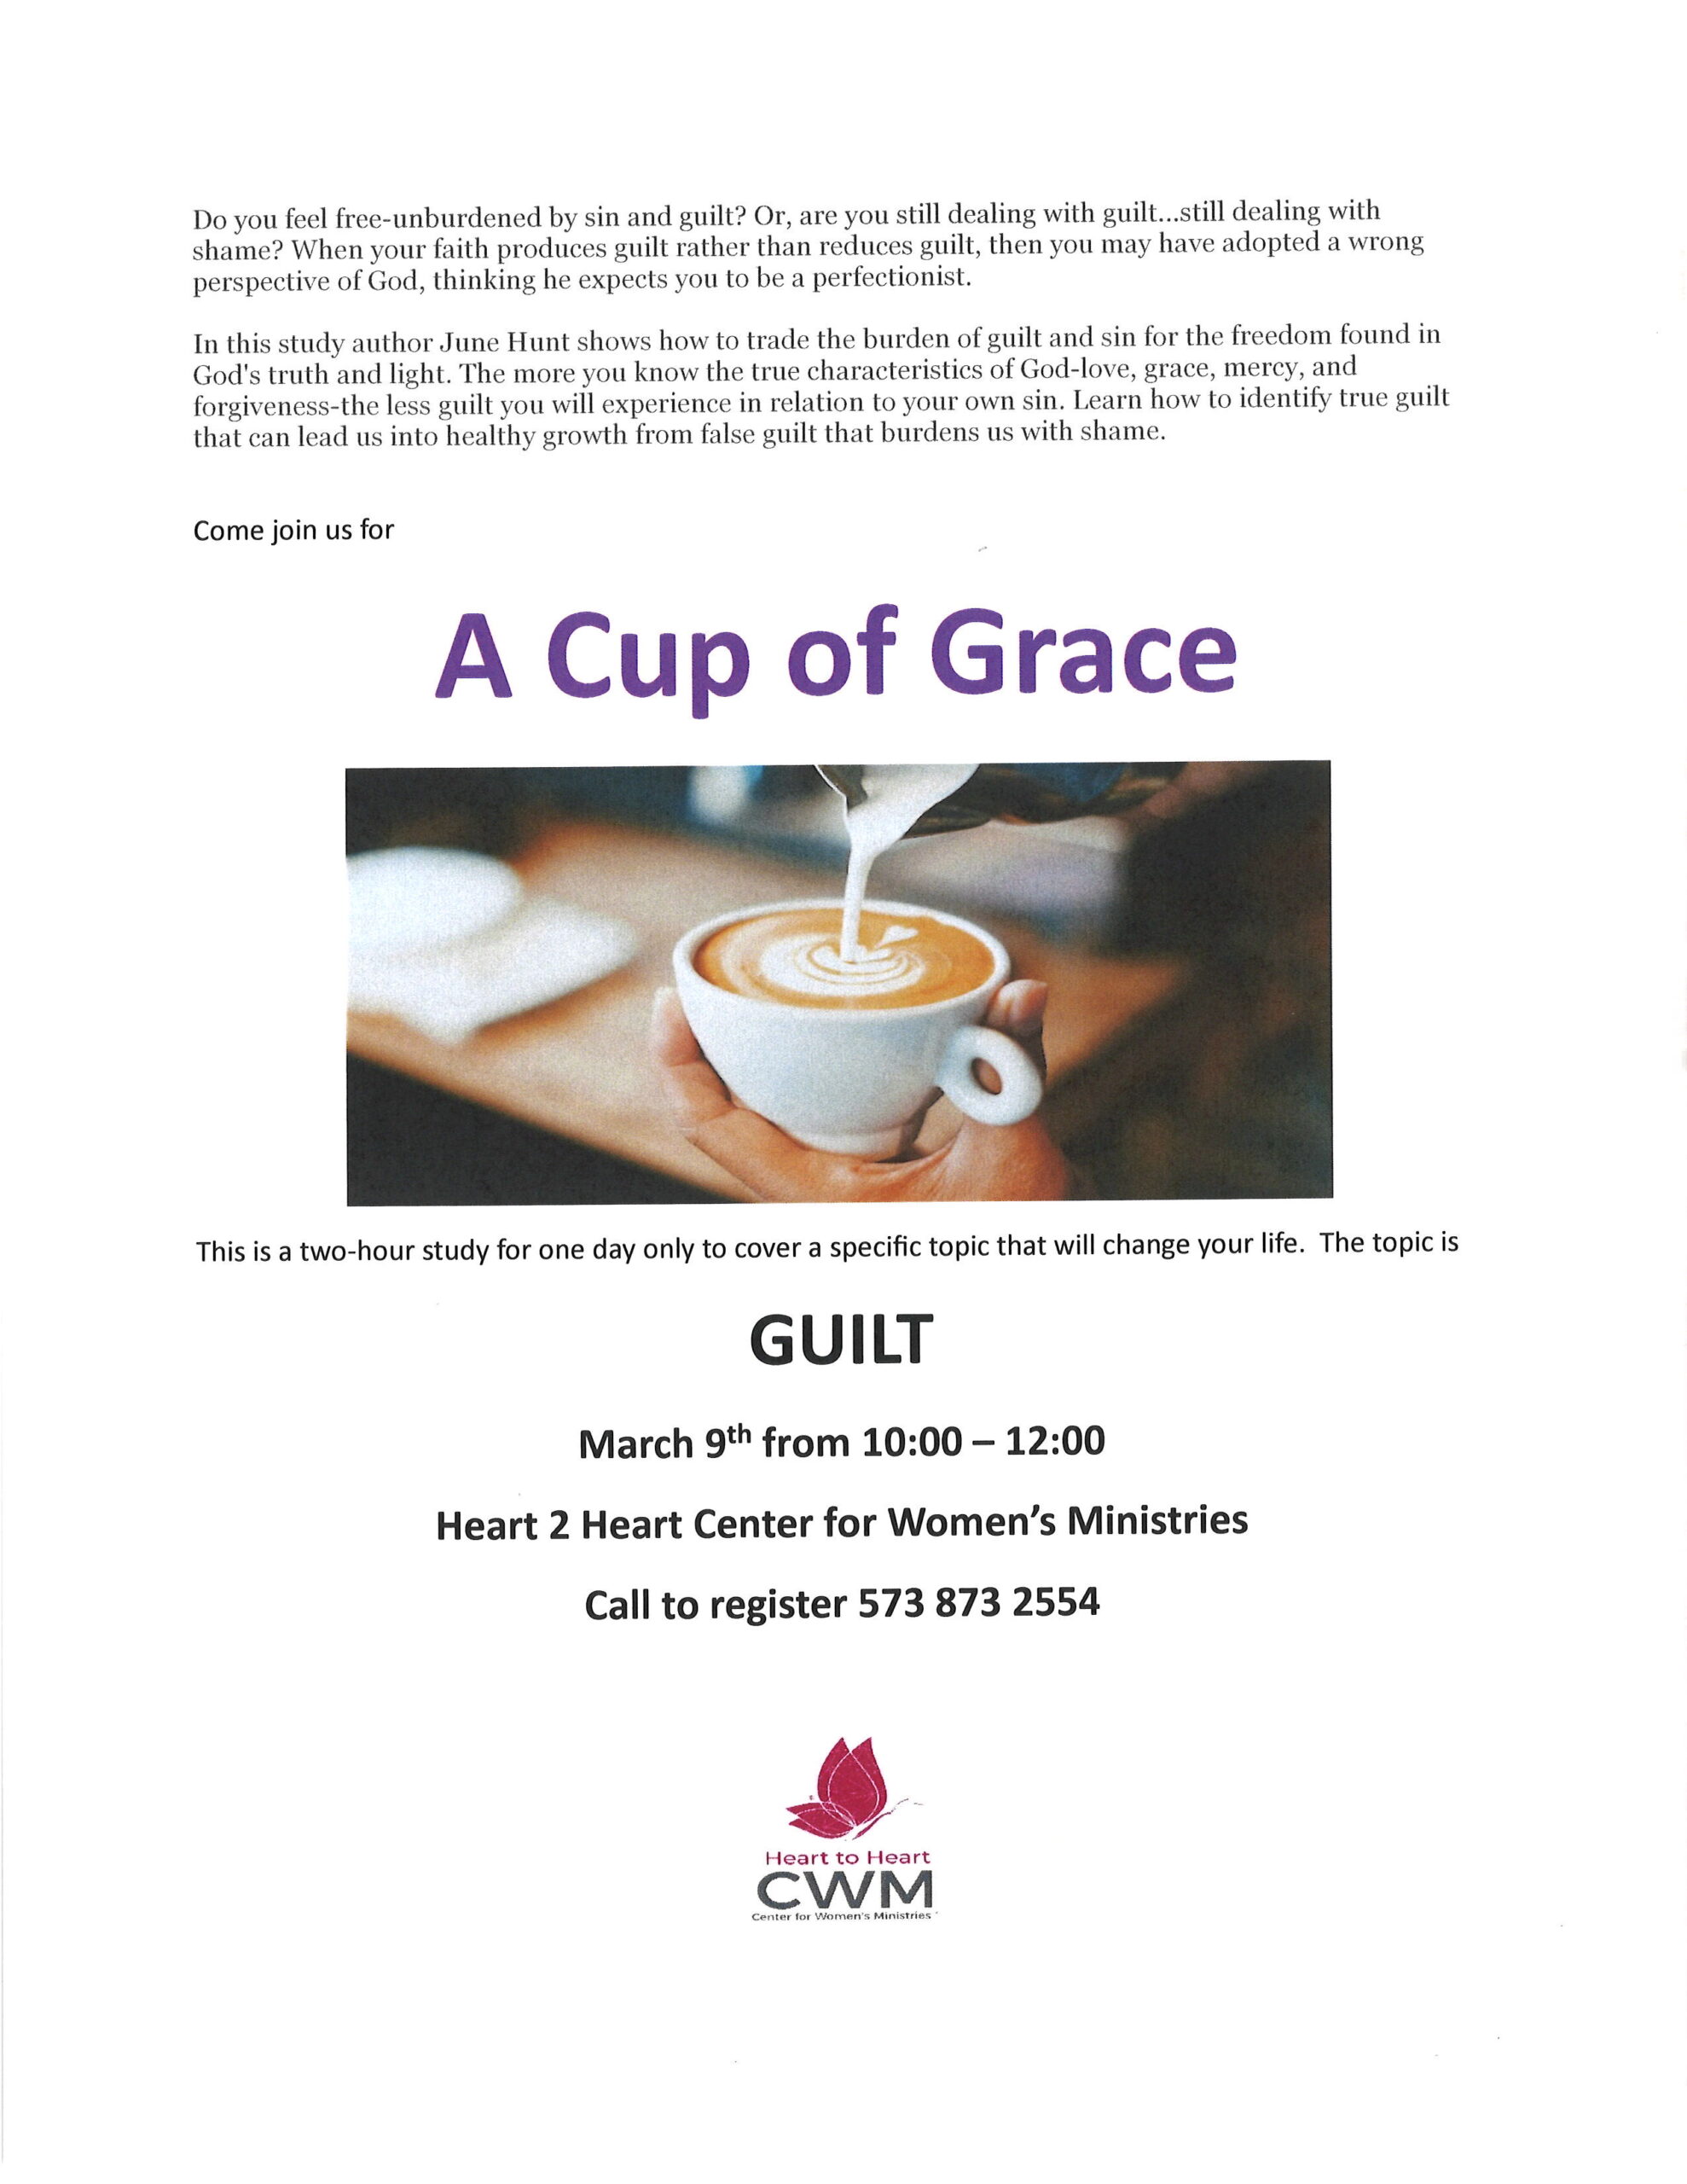 A Cup of Grace poster image